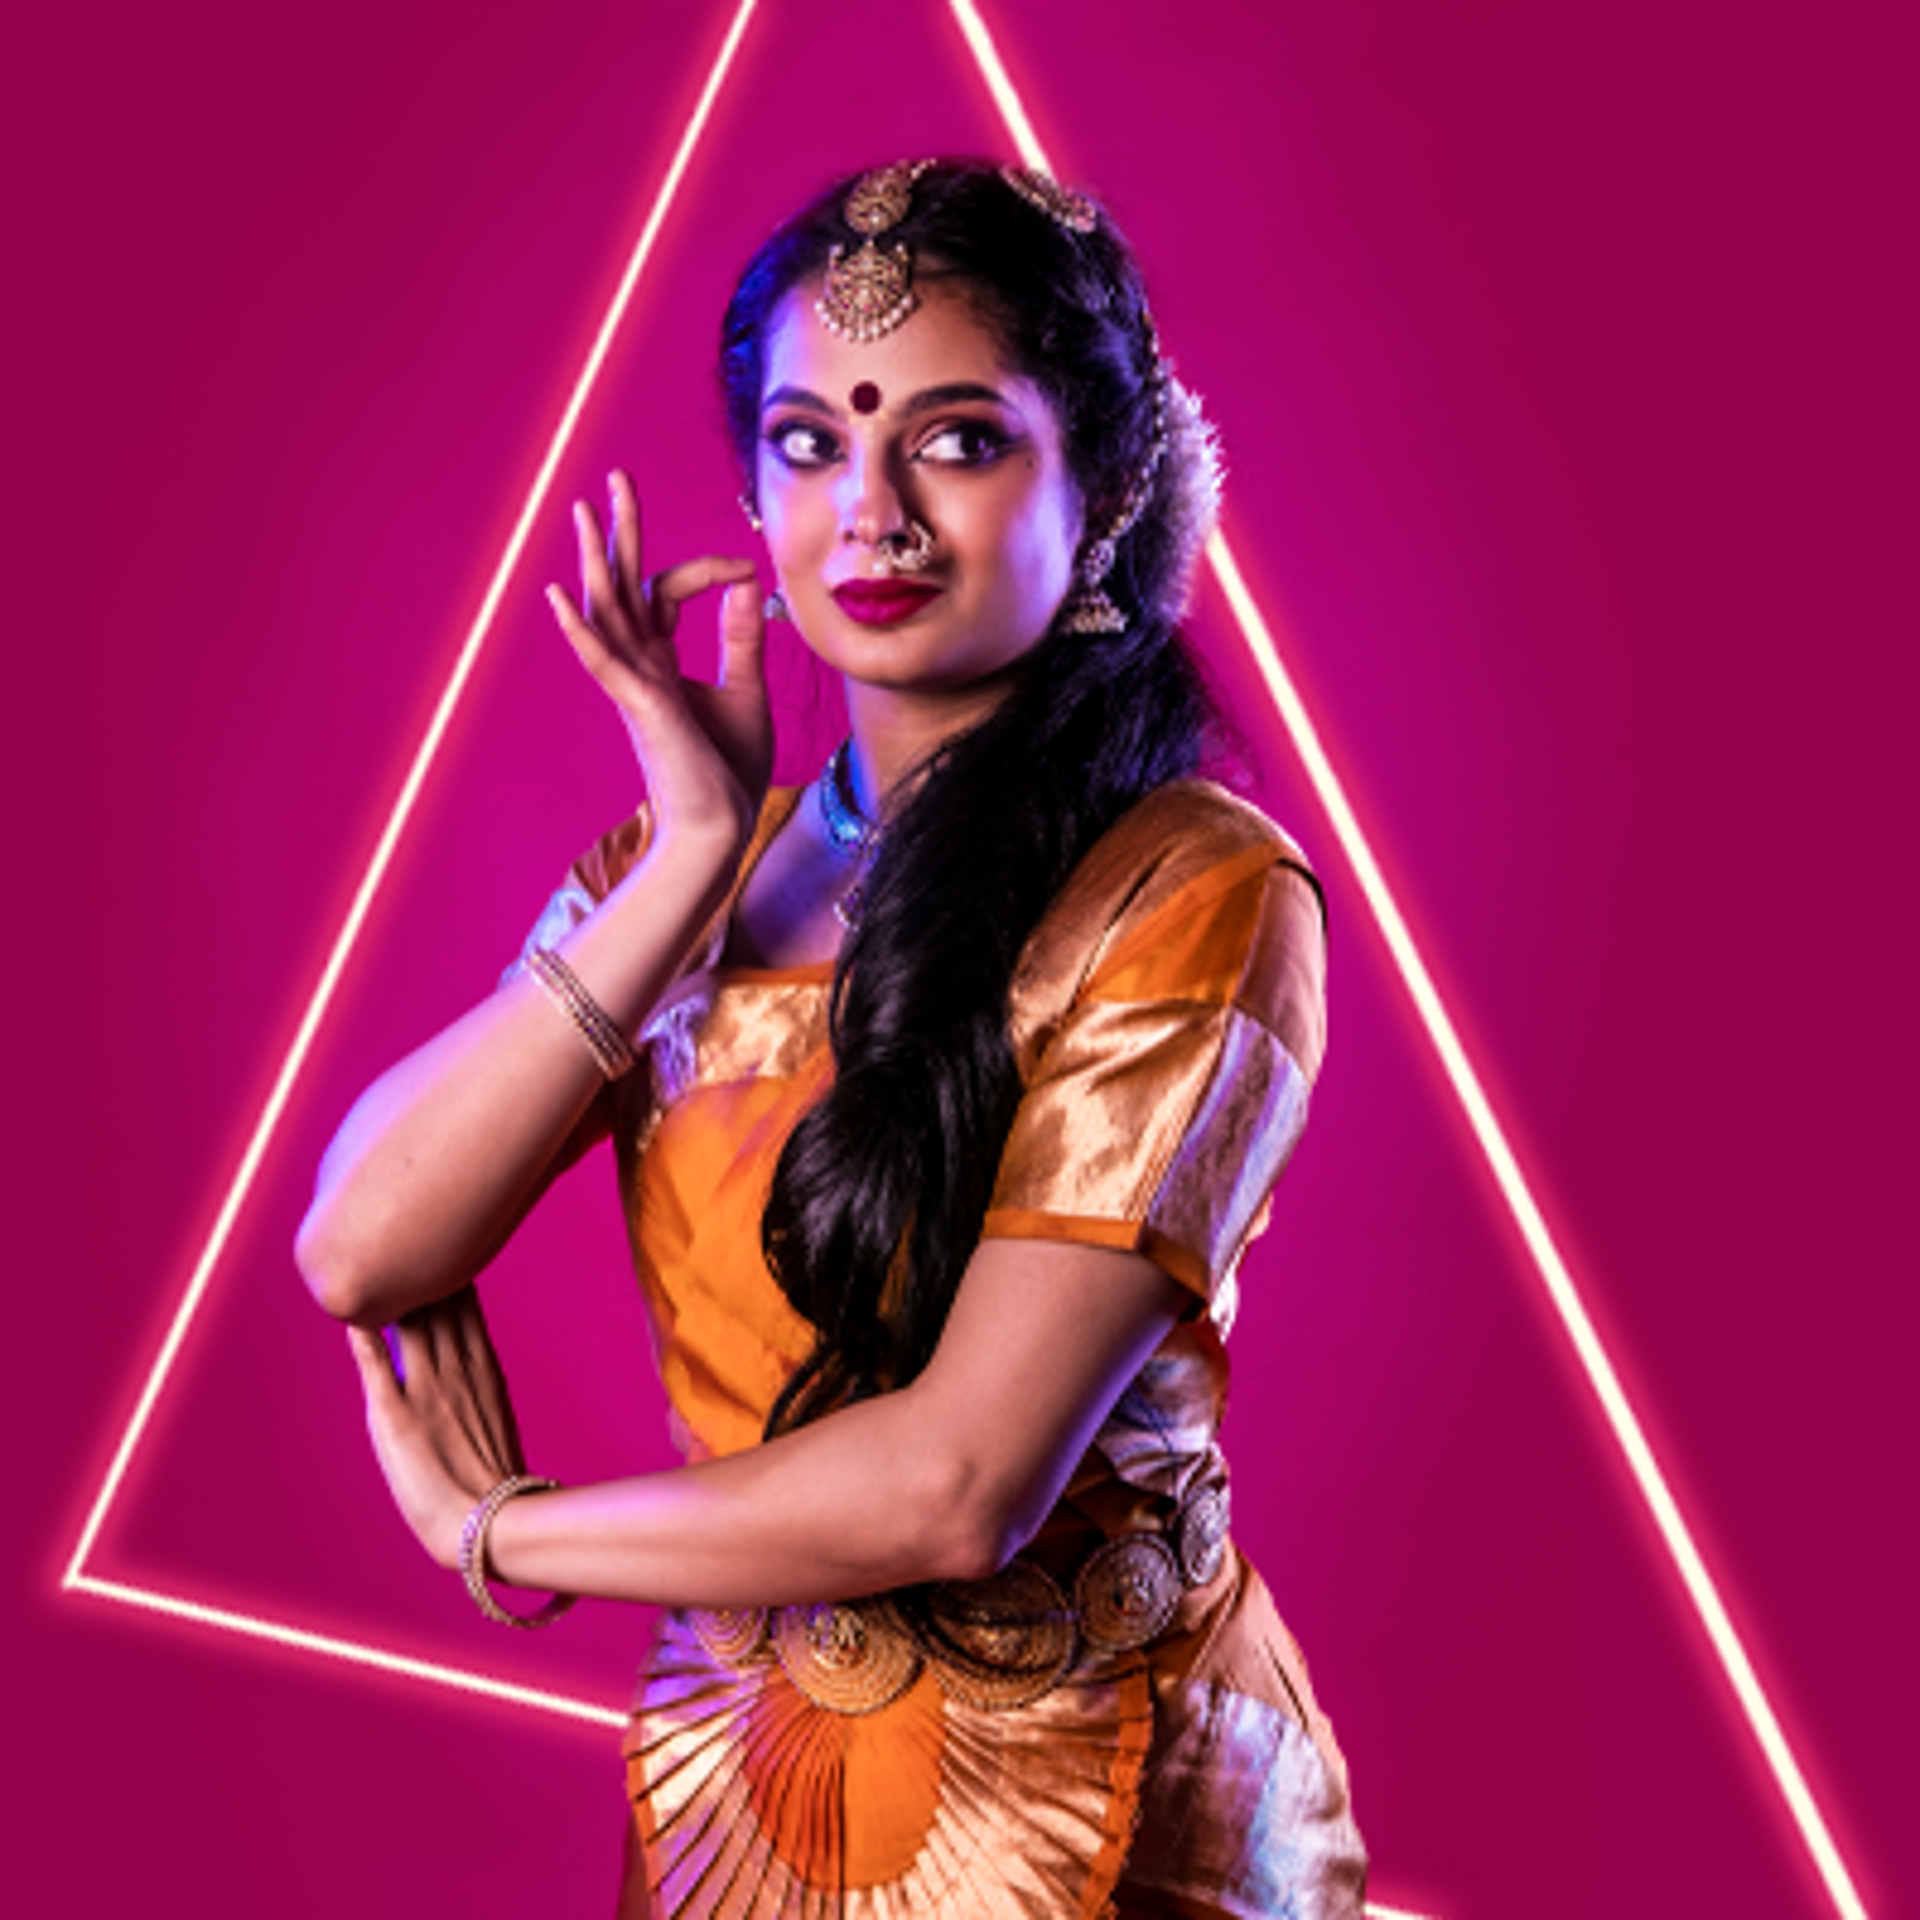 South Asian dancer holding one hand to face and the other towards her elbow on hot pink studio backdrop. Wearing traditional orange dress with gold belt bracelets necklace and head jewellery with gold nose ring.